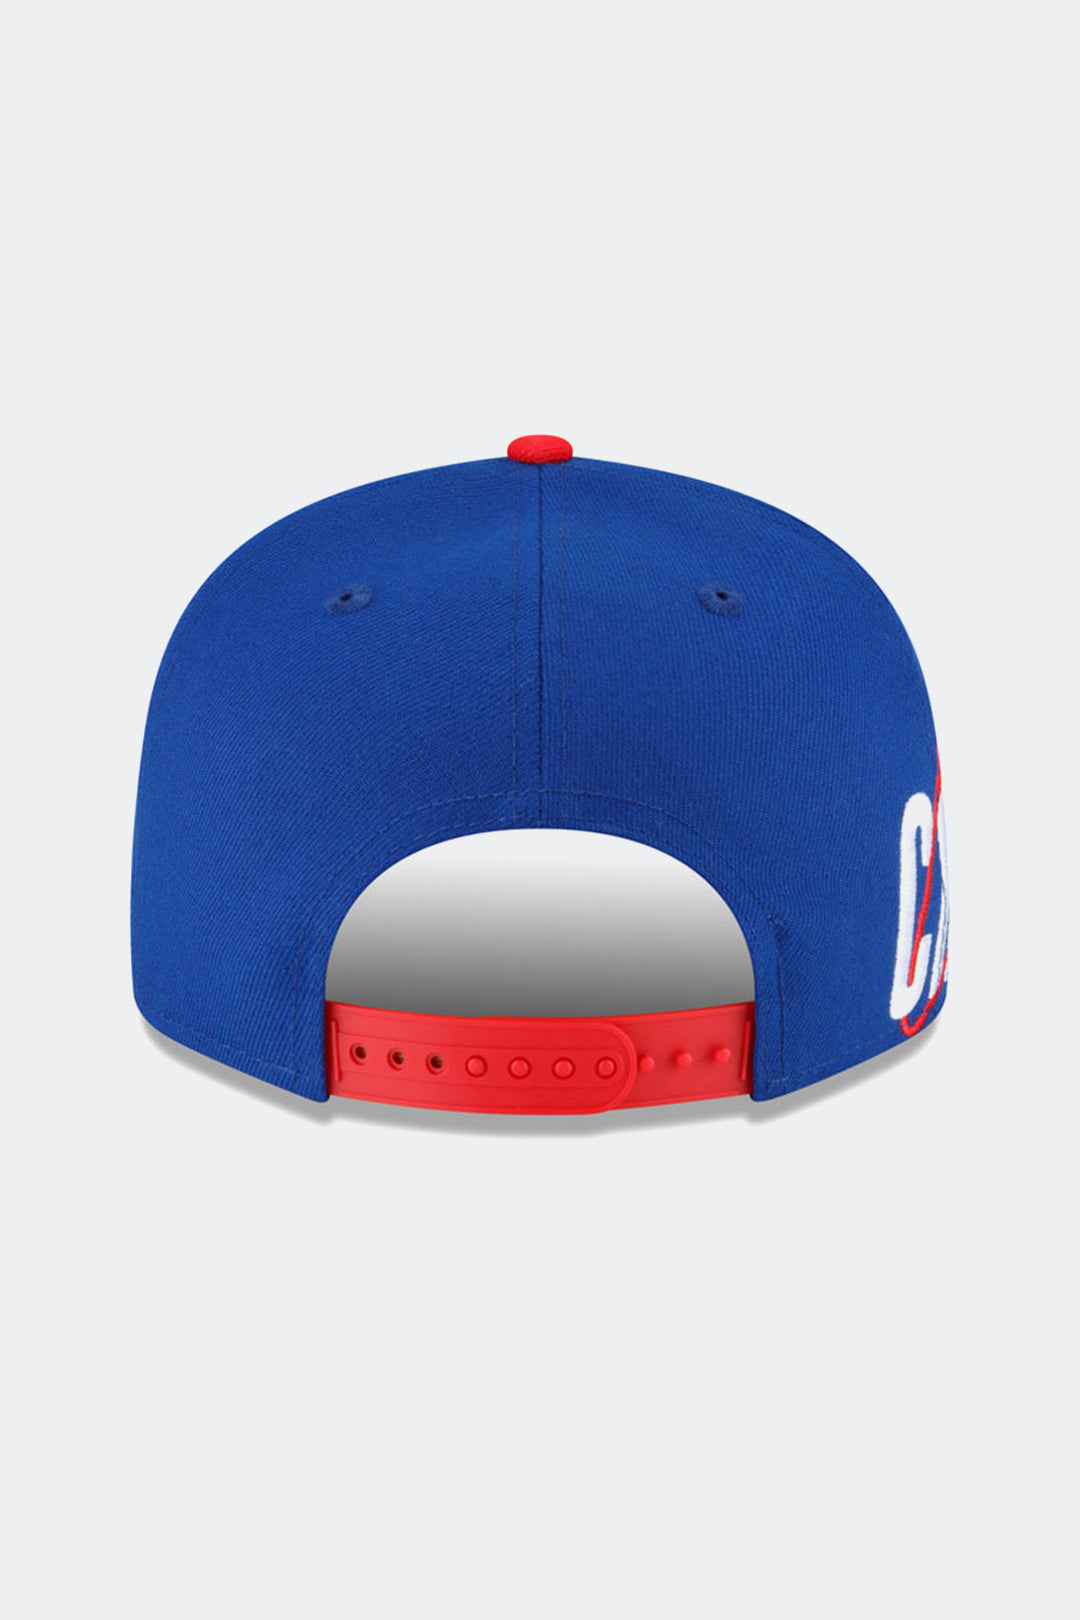 NEW ERA 9FIFTY CHICAGO CUBS "SIDE FONT" - HYPE